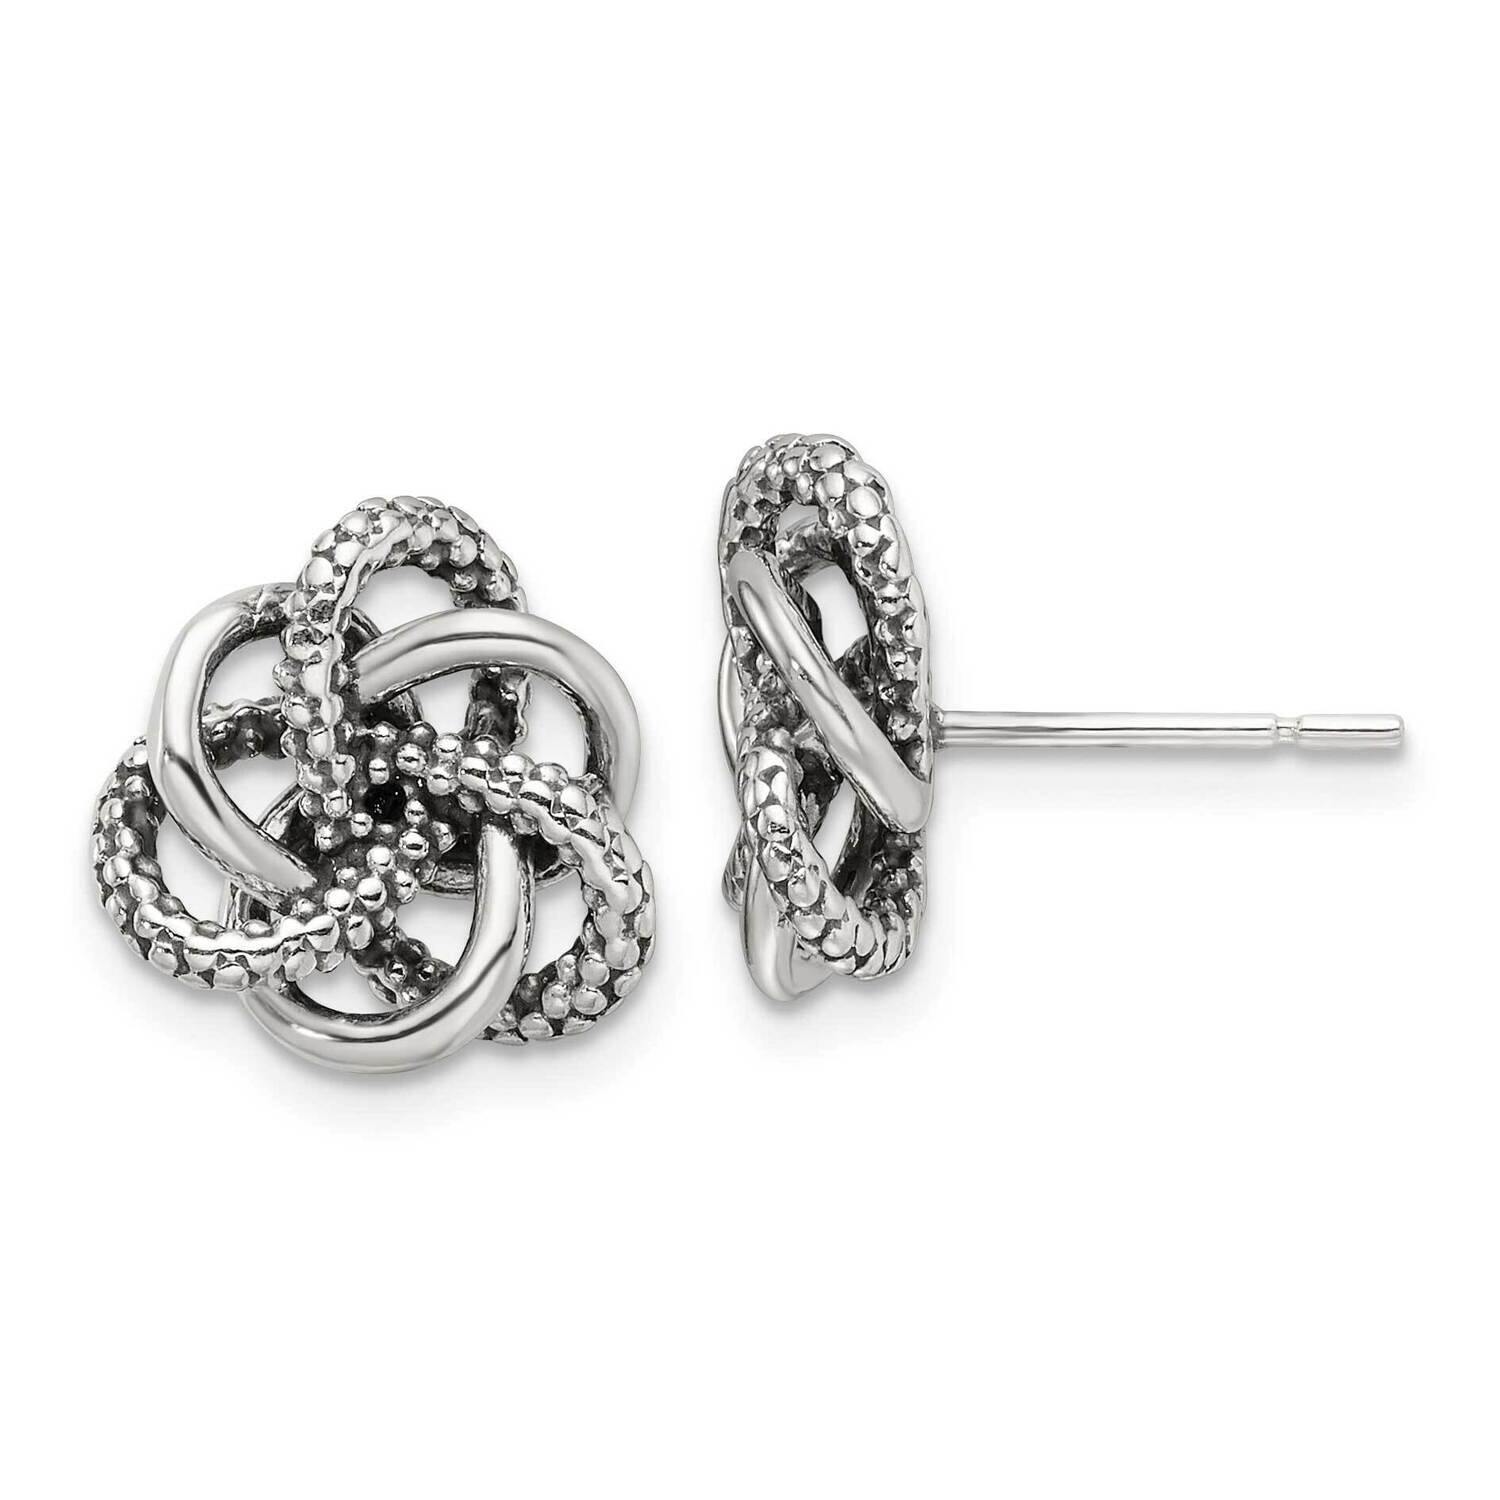 Antiqued Polished Love Knot Post Earrings Sterling Silver QE17475